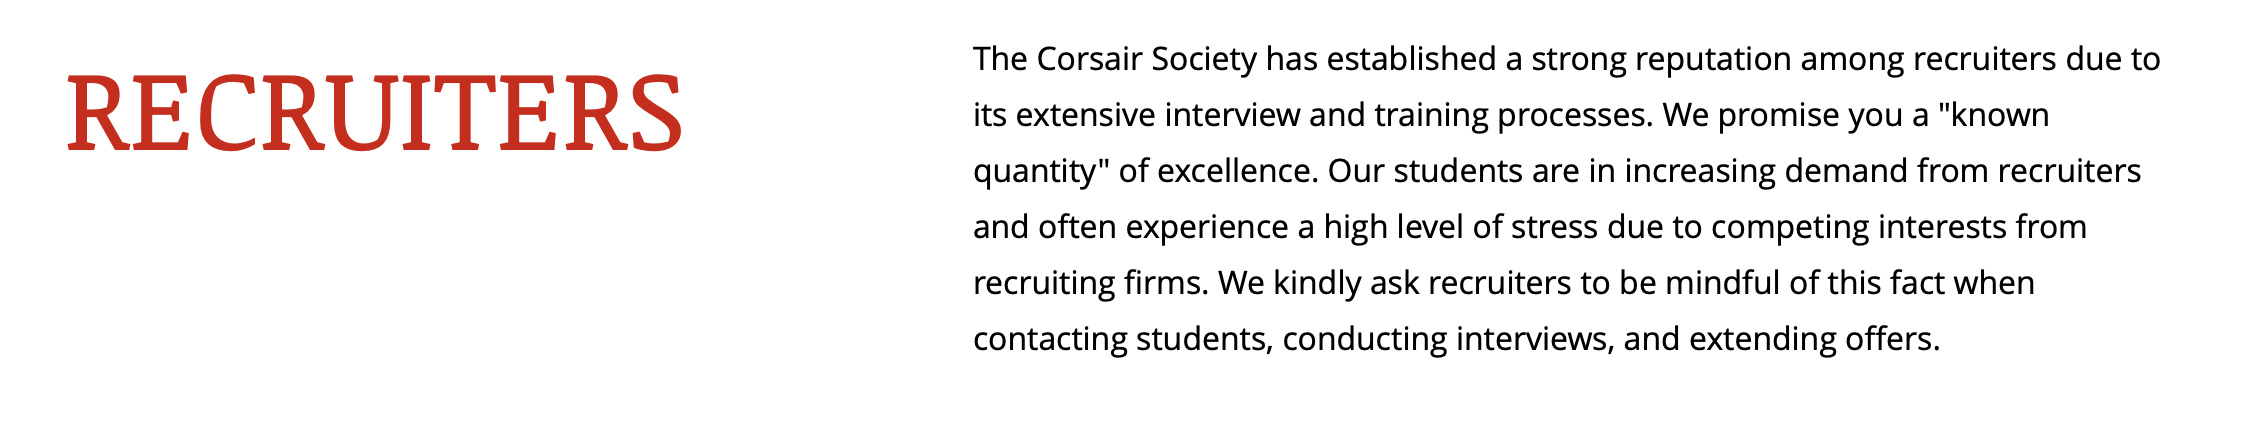 "The Corsair Society has established a strong reputation among recruiters due to its extensive interview and training processes. We promise you a "known quantity" of excellence. Our students are in increasing demand from recruiters and often experience a high level of stress due to competing interests from recruiting firms. We kindly ask recruiters to be mindful of this fact when contacting students, conducting interviews, and extending offers. "